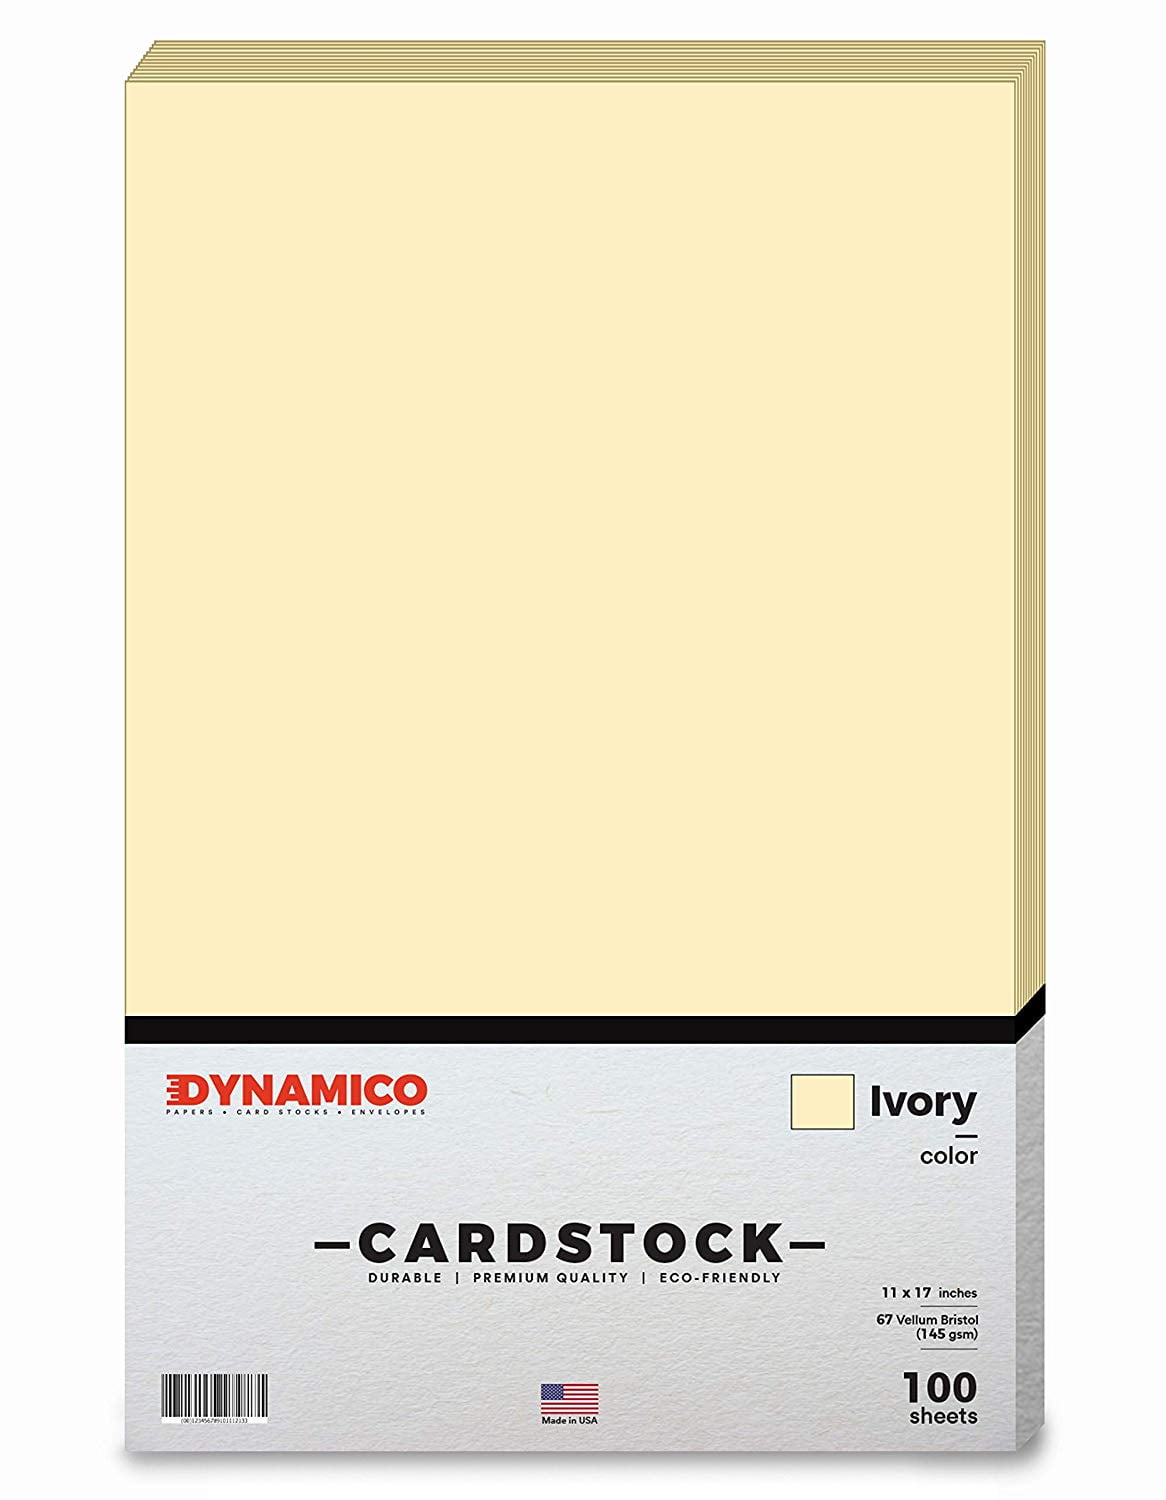 Ivory 11 x 17 Pastel Color Cardstock Paper - for Cards and Stationery  Printing, Medium to Light Weight Card Stock 67 LB Vellum Bristol